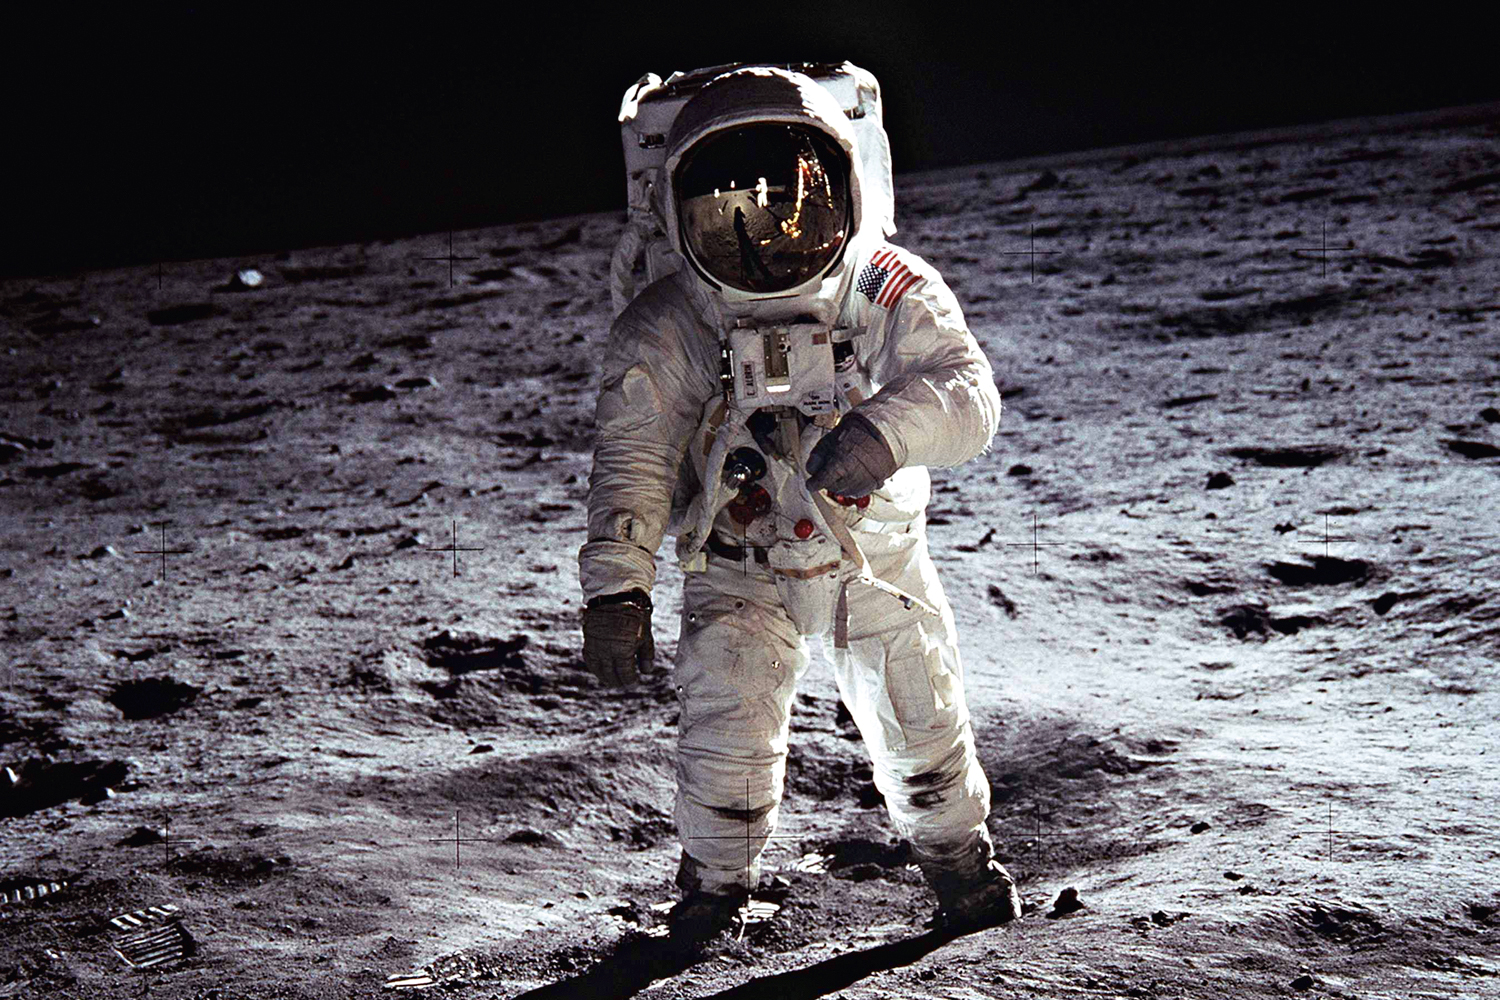 On the Moon - Neil Armstrong 1969: A clumsy dress -